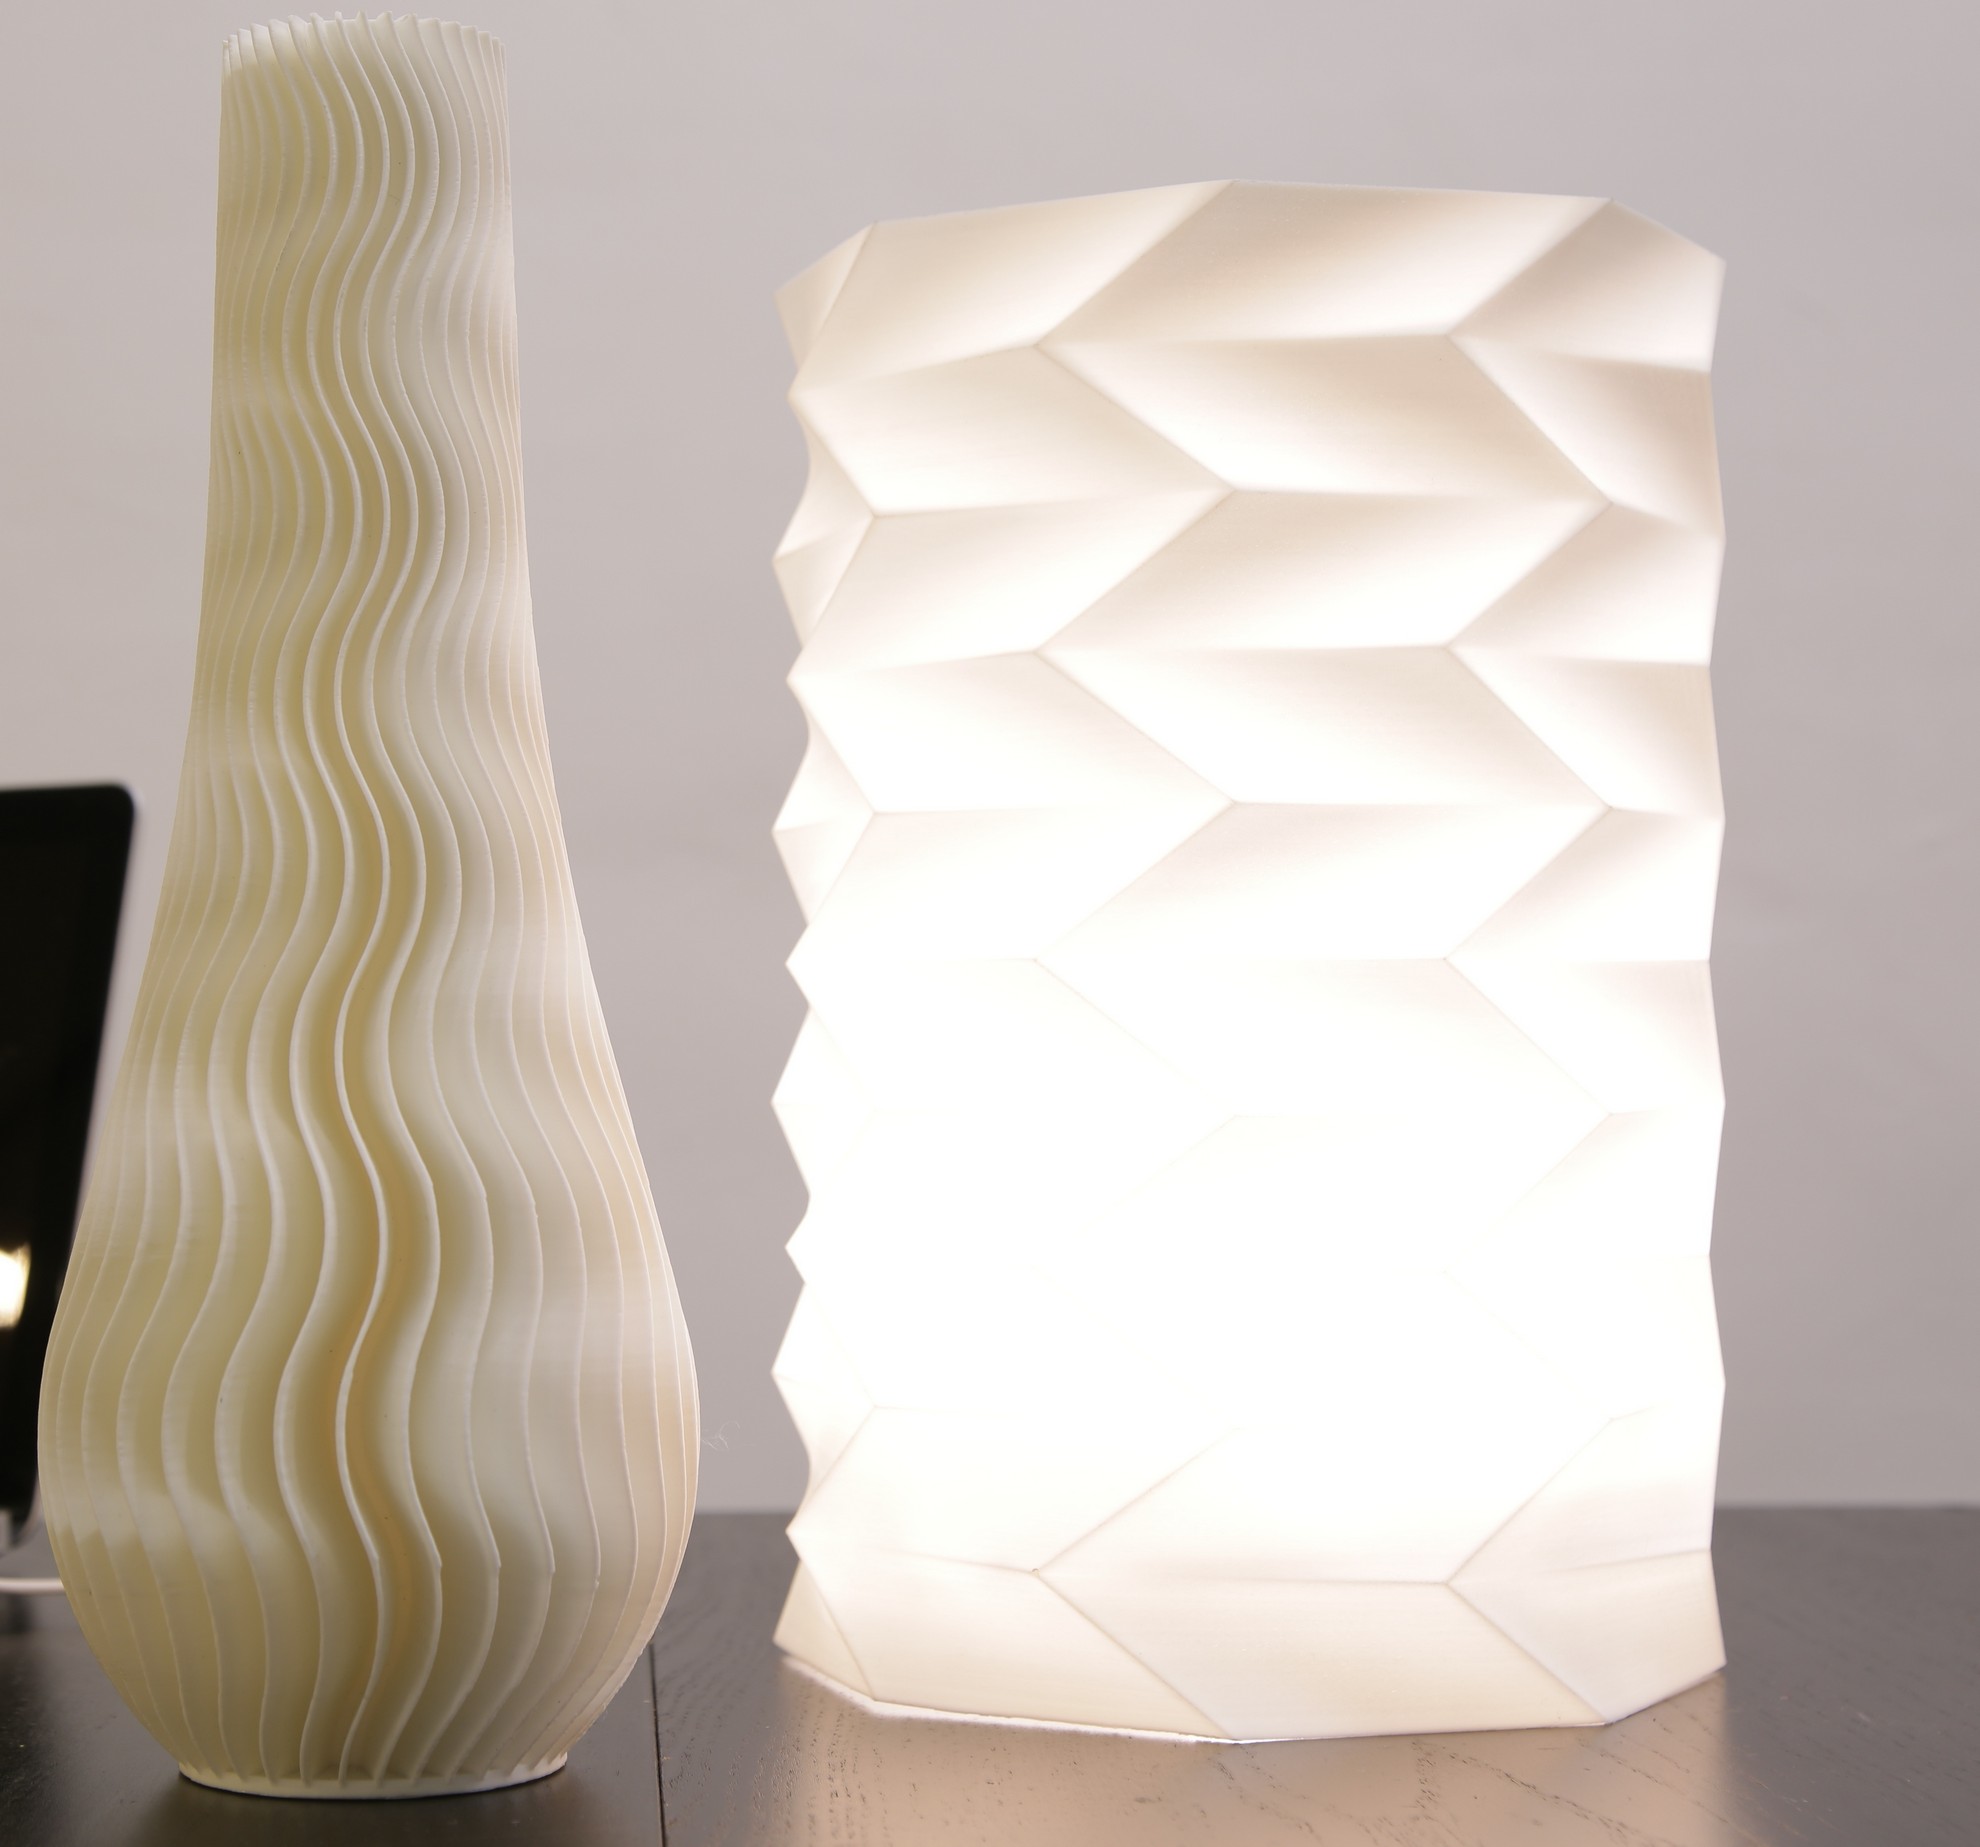 3d Printed Lamps How To Freshen Up The, Table Lamp Shade 3d Printed